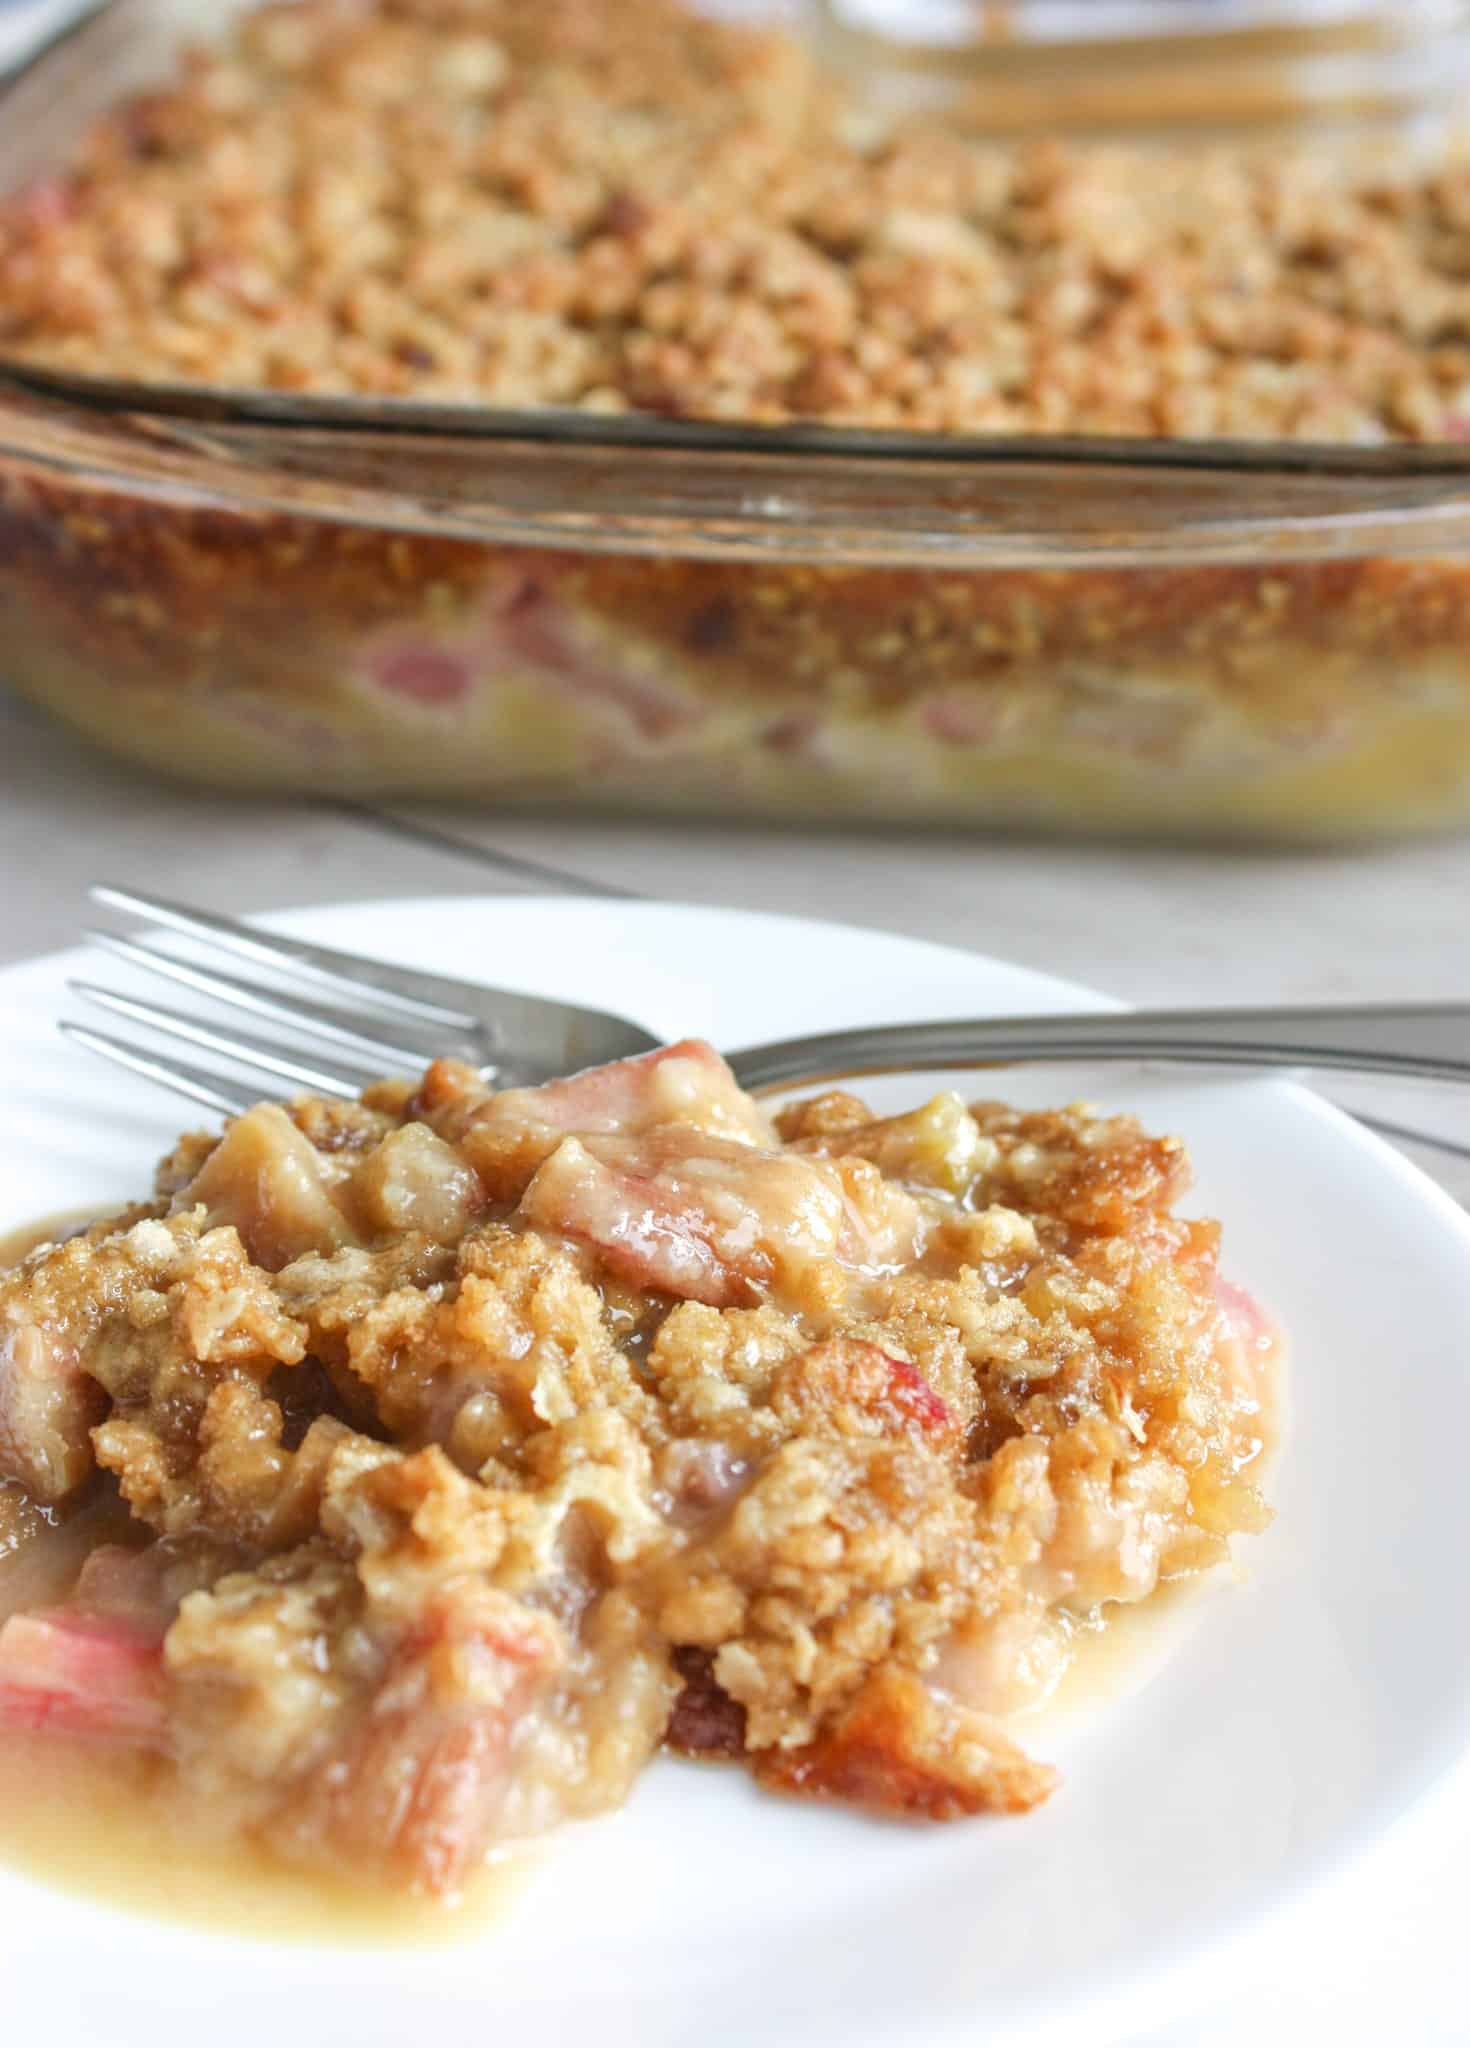 Gluten Free Rhubarb Crisp is an easy dessert that is loaded with flavour.  This seasonal favourite is a very tasty way to use rhubarb and it will surprise the taste buds of those who are able to consume gluten.